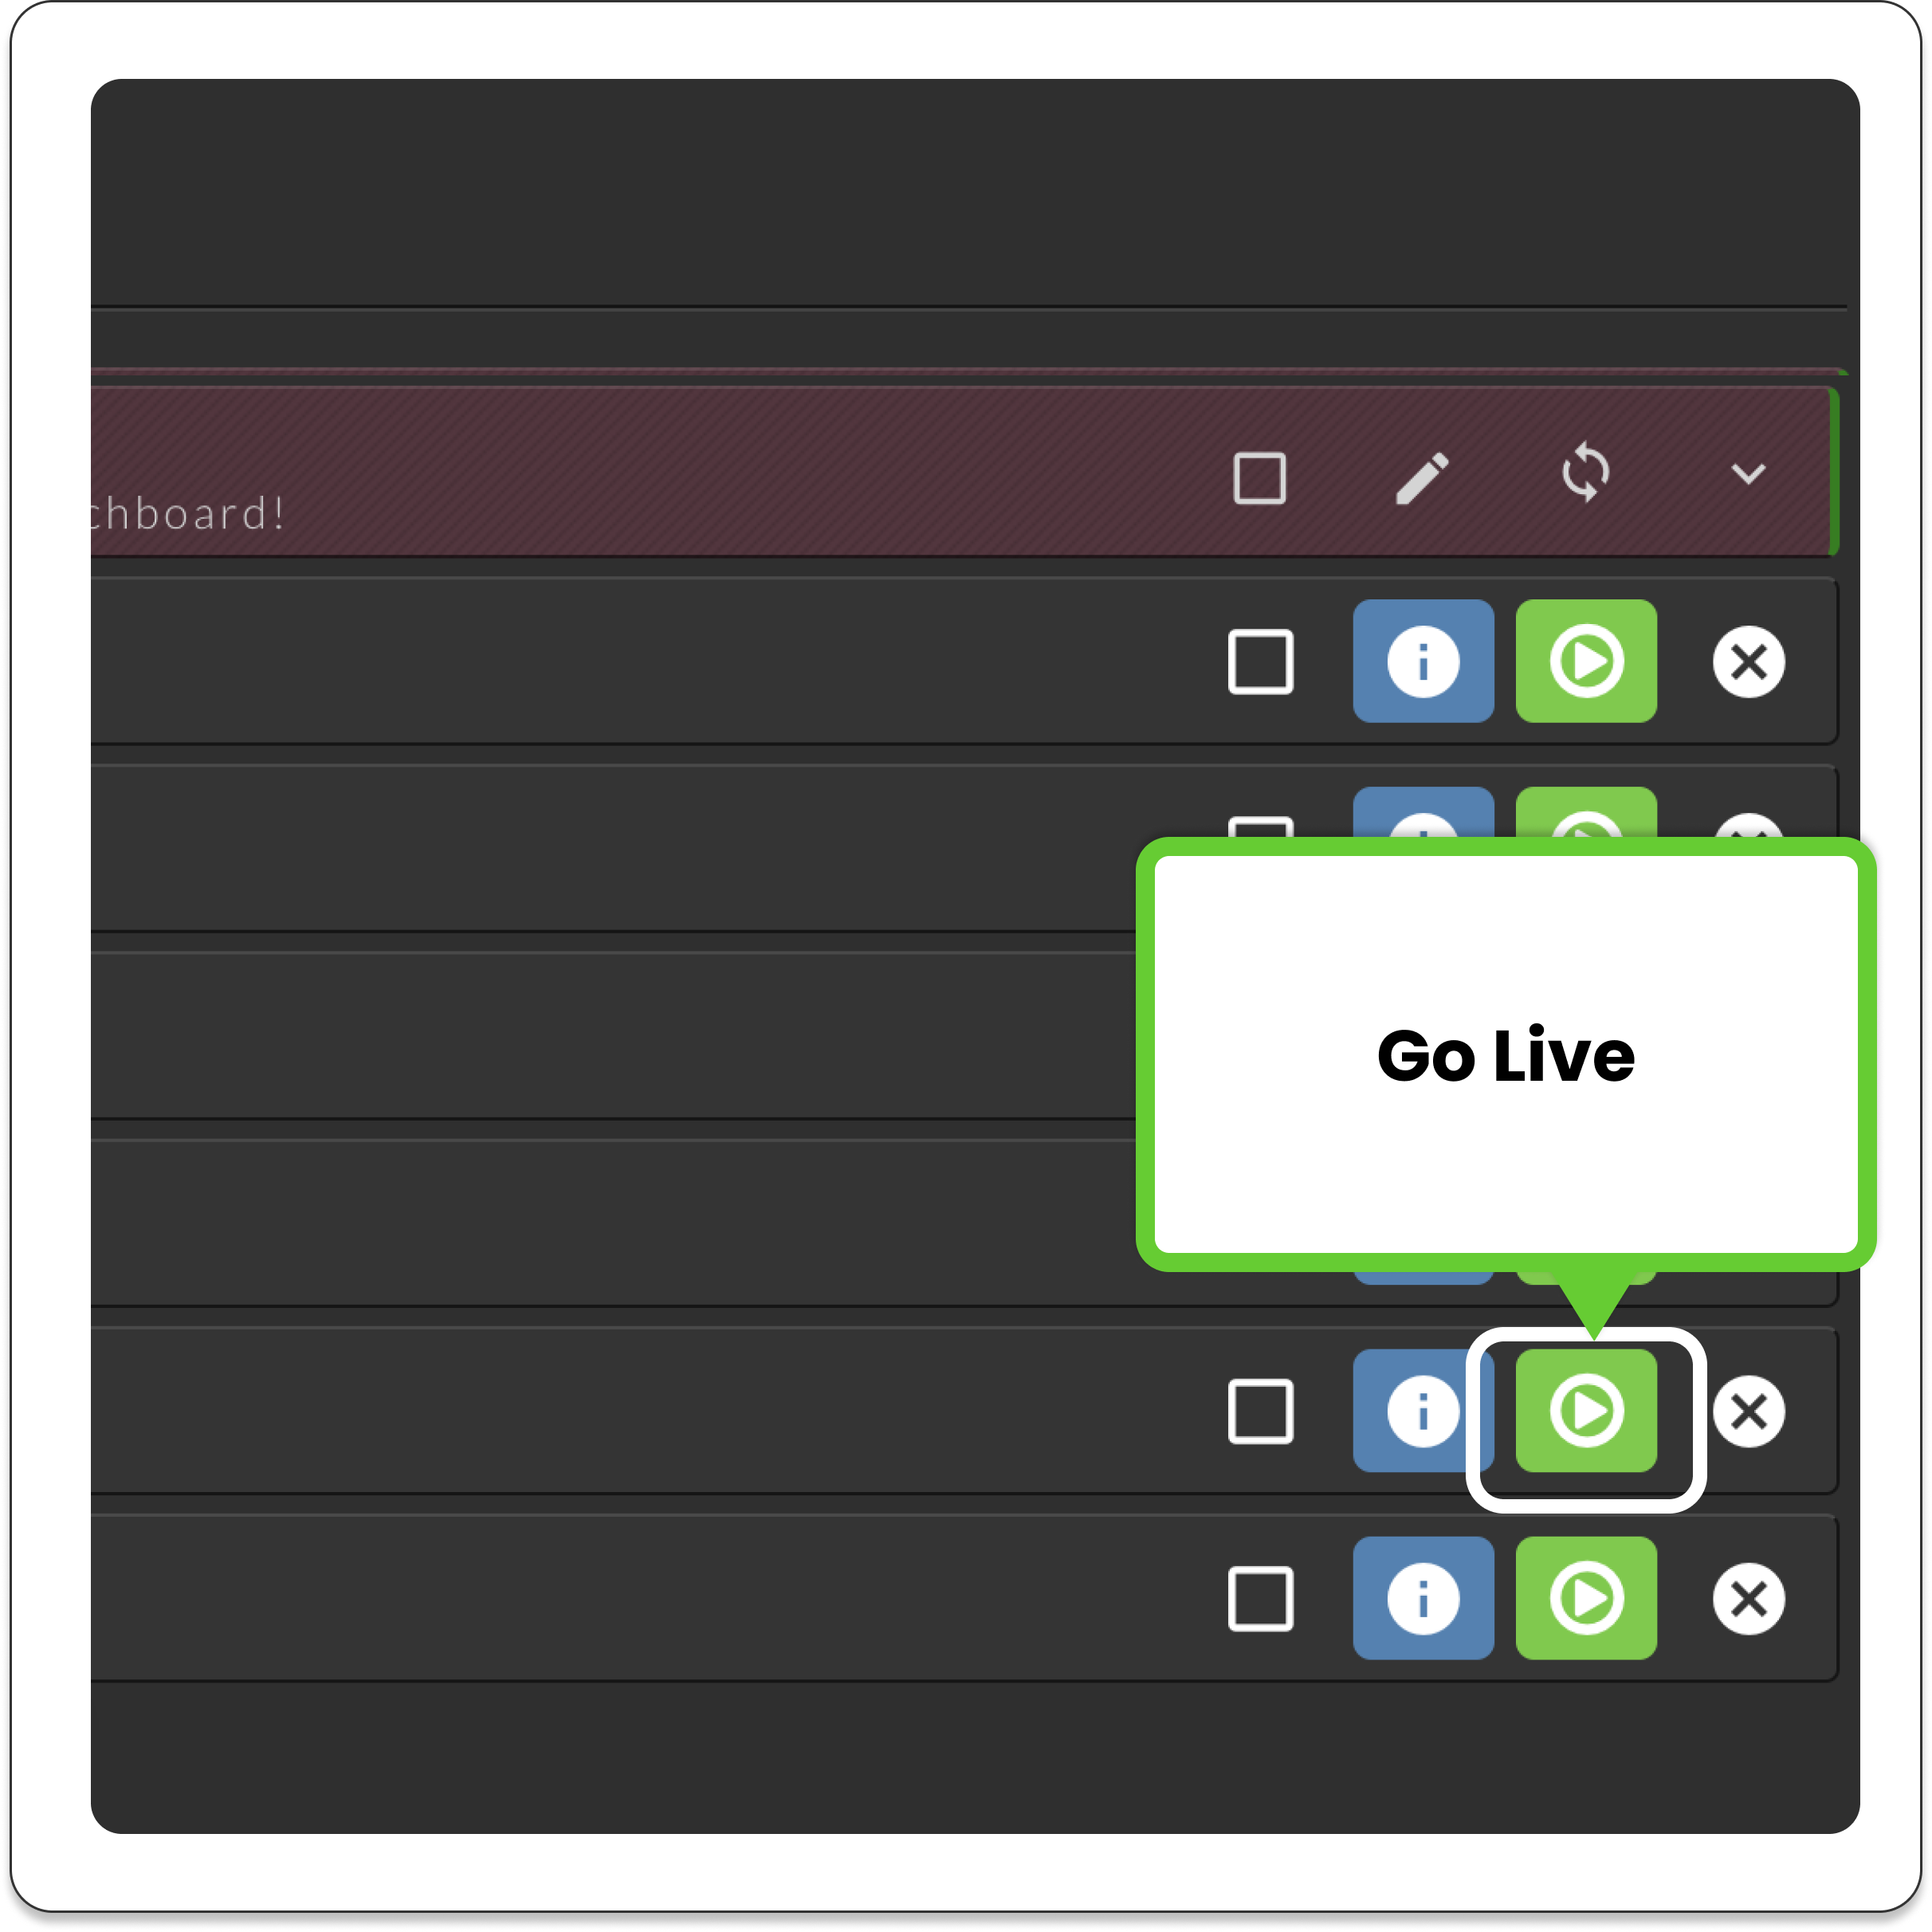 switchboardlive_workflow-page_destinations_pane_multistreaming_video_present_goLive_button.png